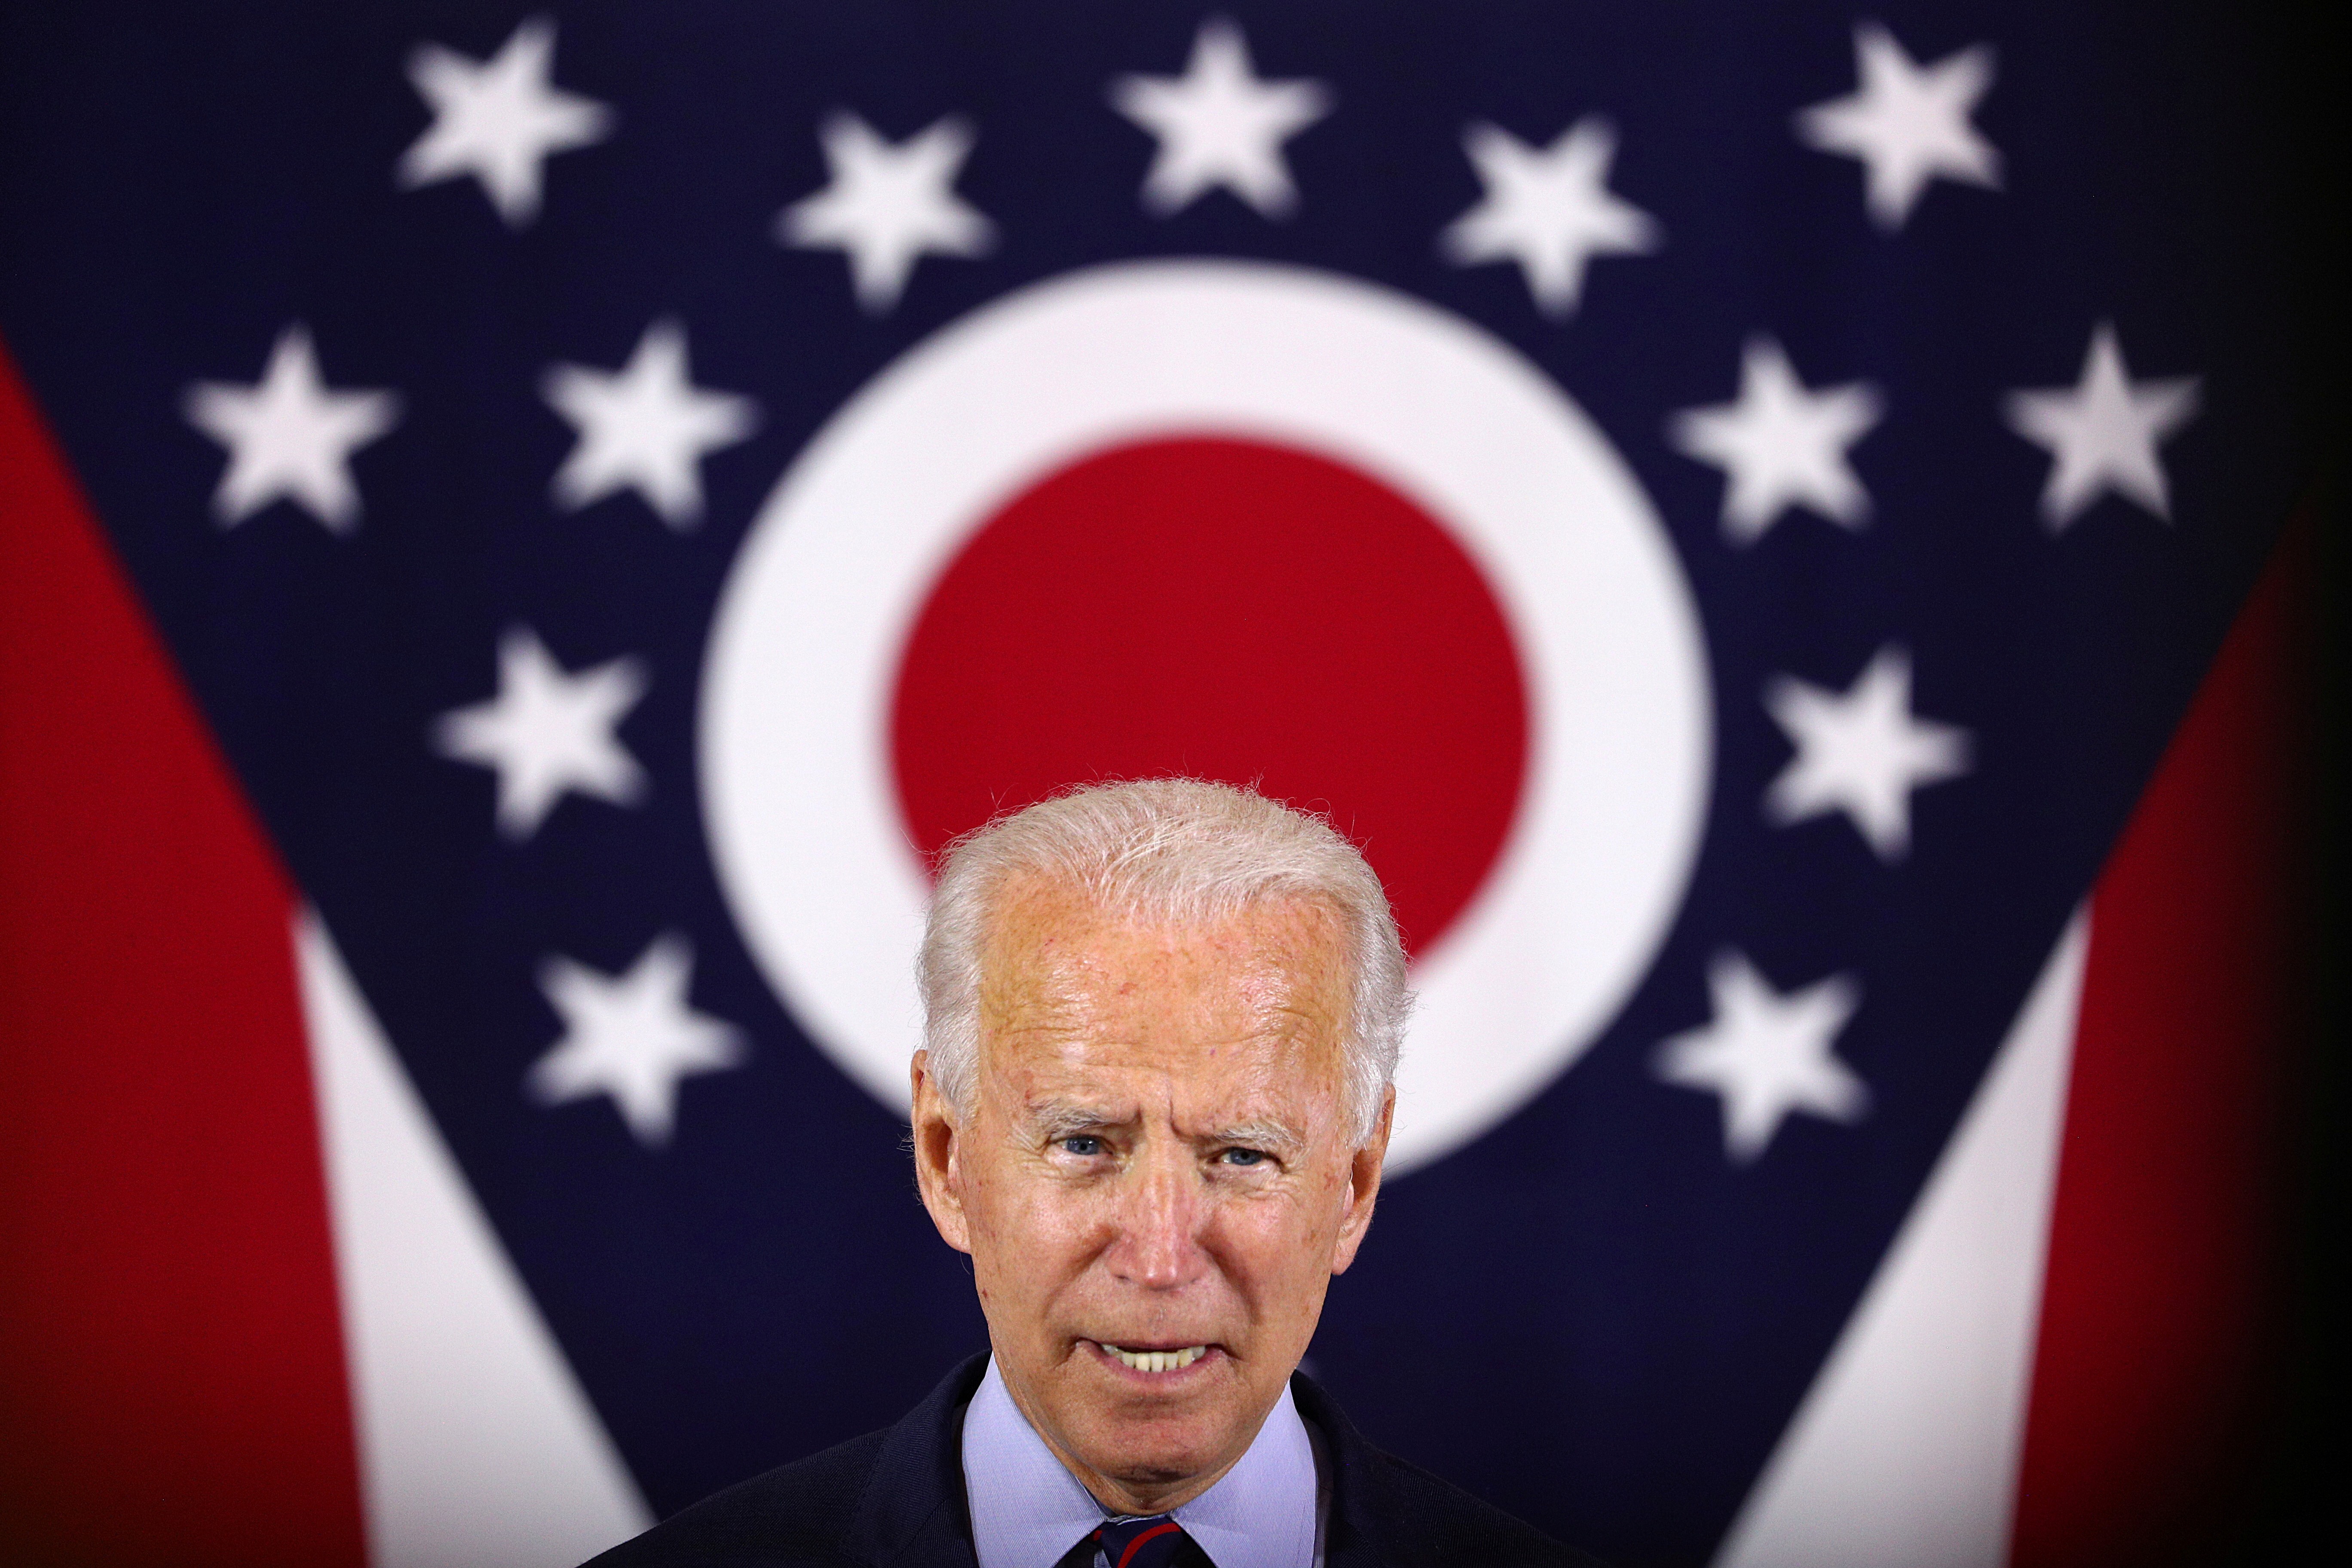 US Democratic presidential candidate Joe Biden delivers remarks at a campaign stop in Cincinnati, Ohio, on Monday. Photo: Reuters